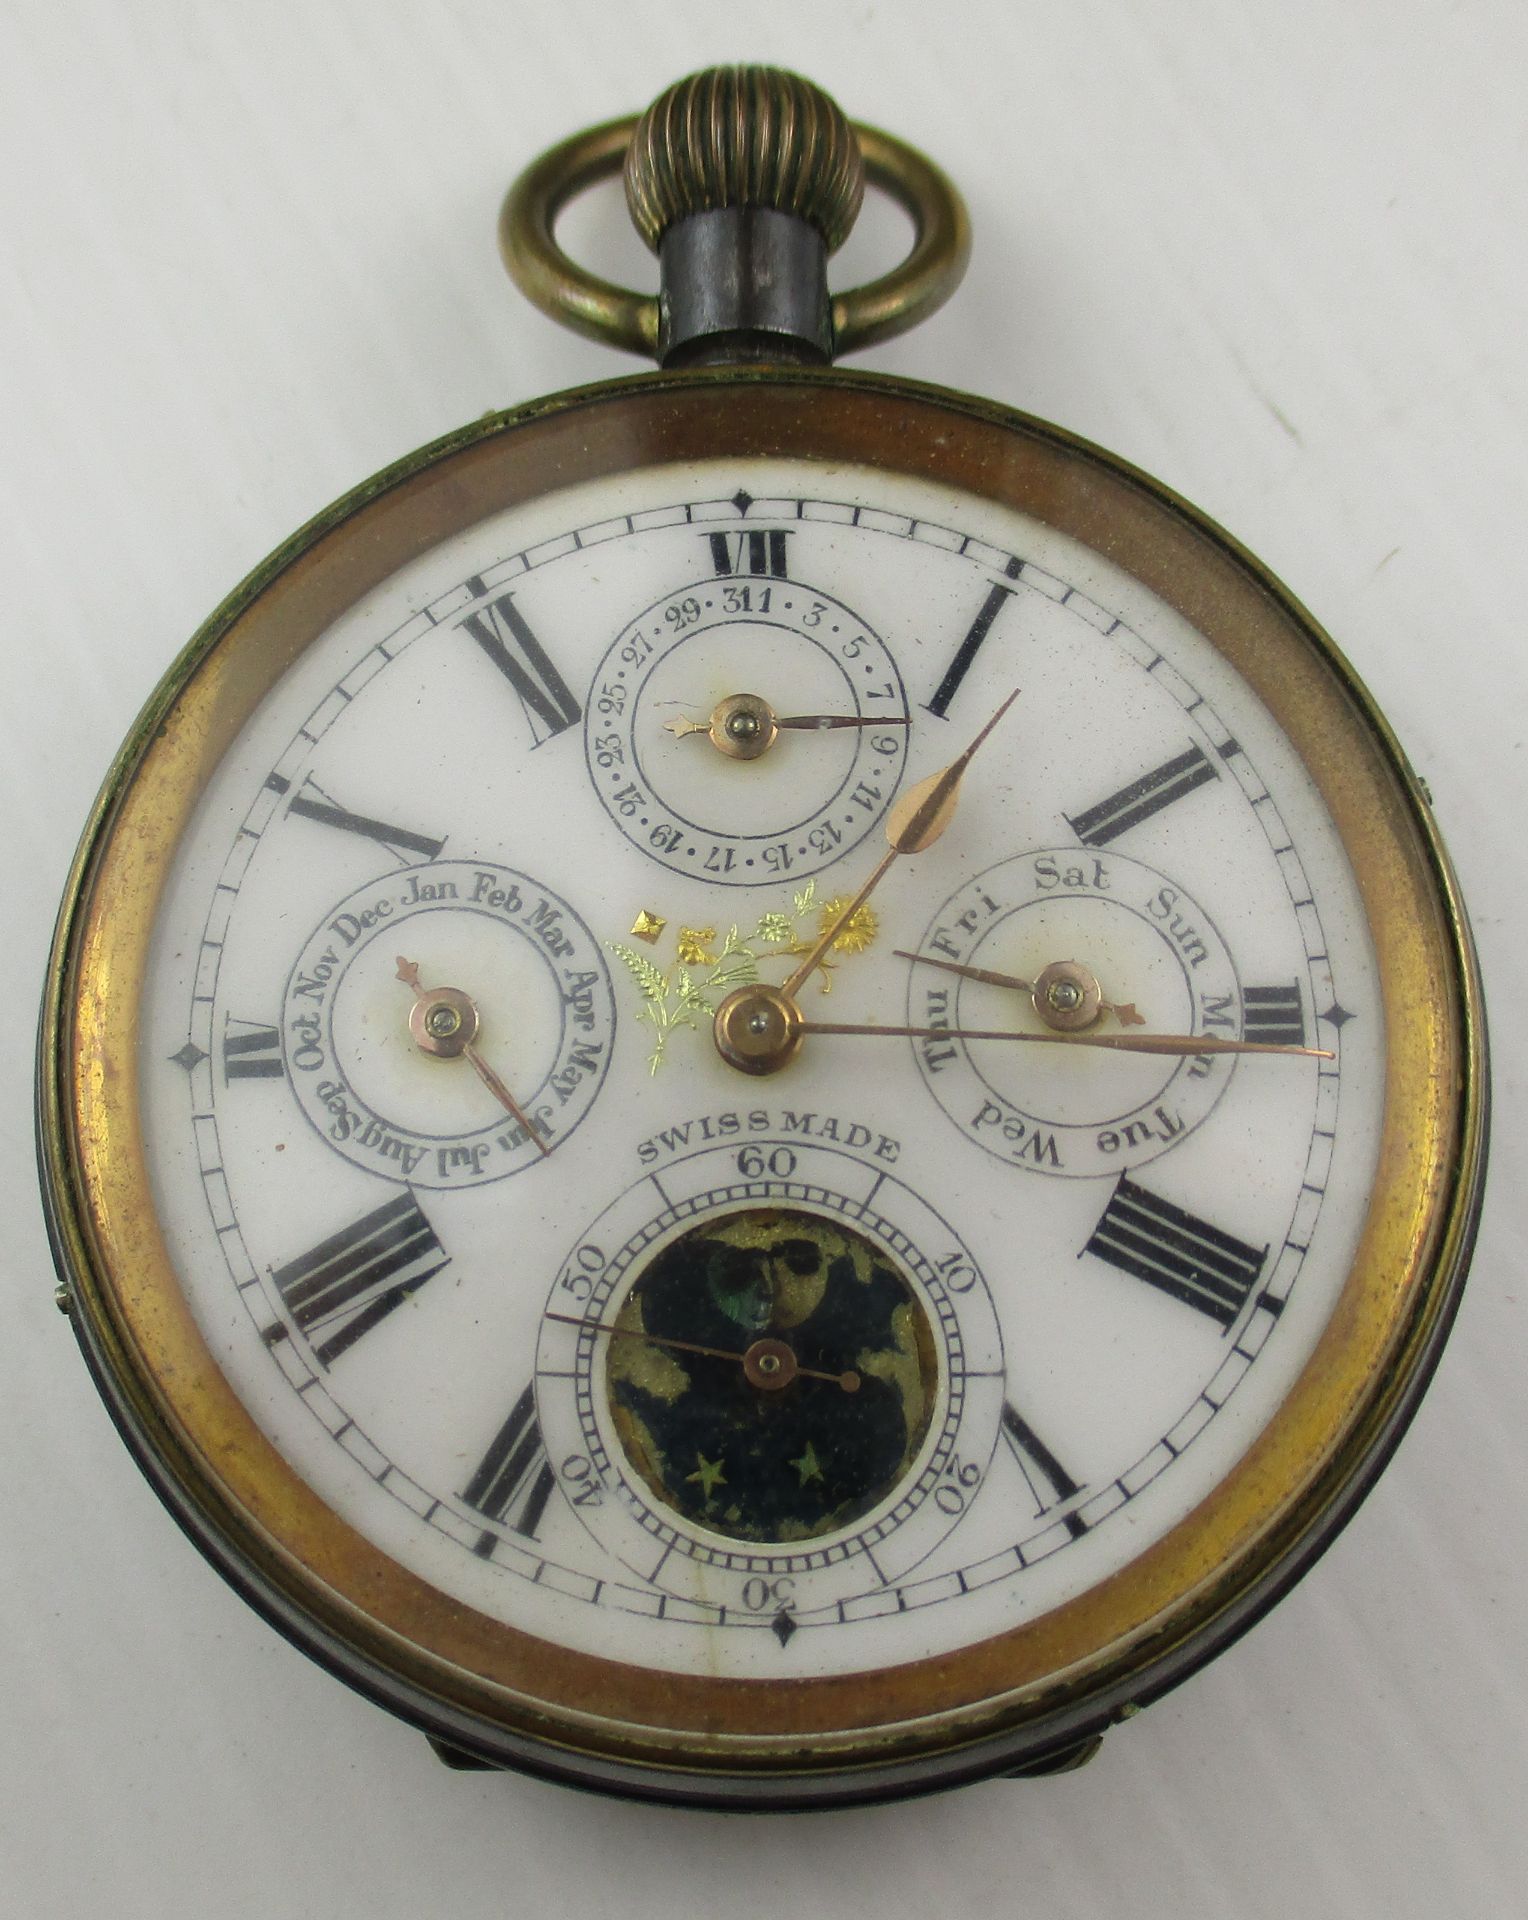 A Swiss perpetual chronograph moon phase pocket watch with white enamel dial, - Image 2 of 2